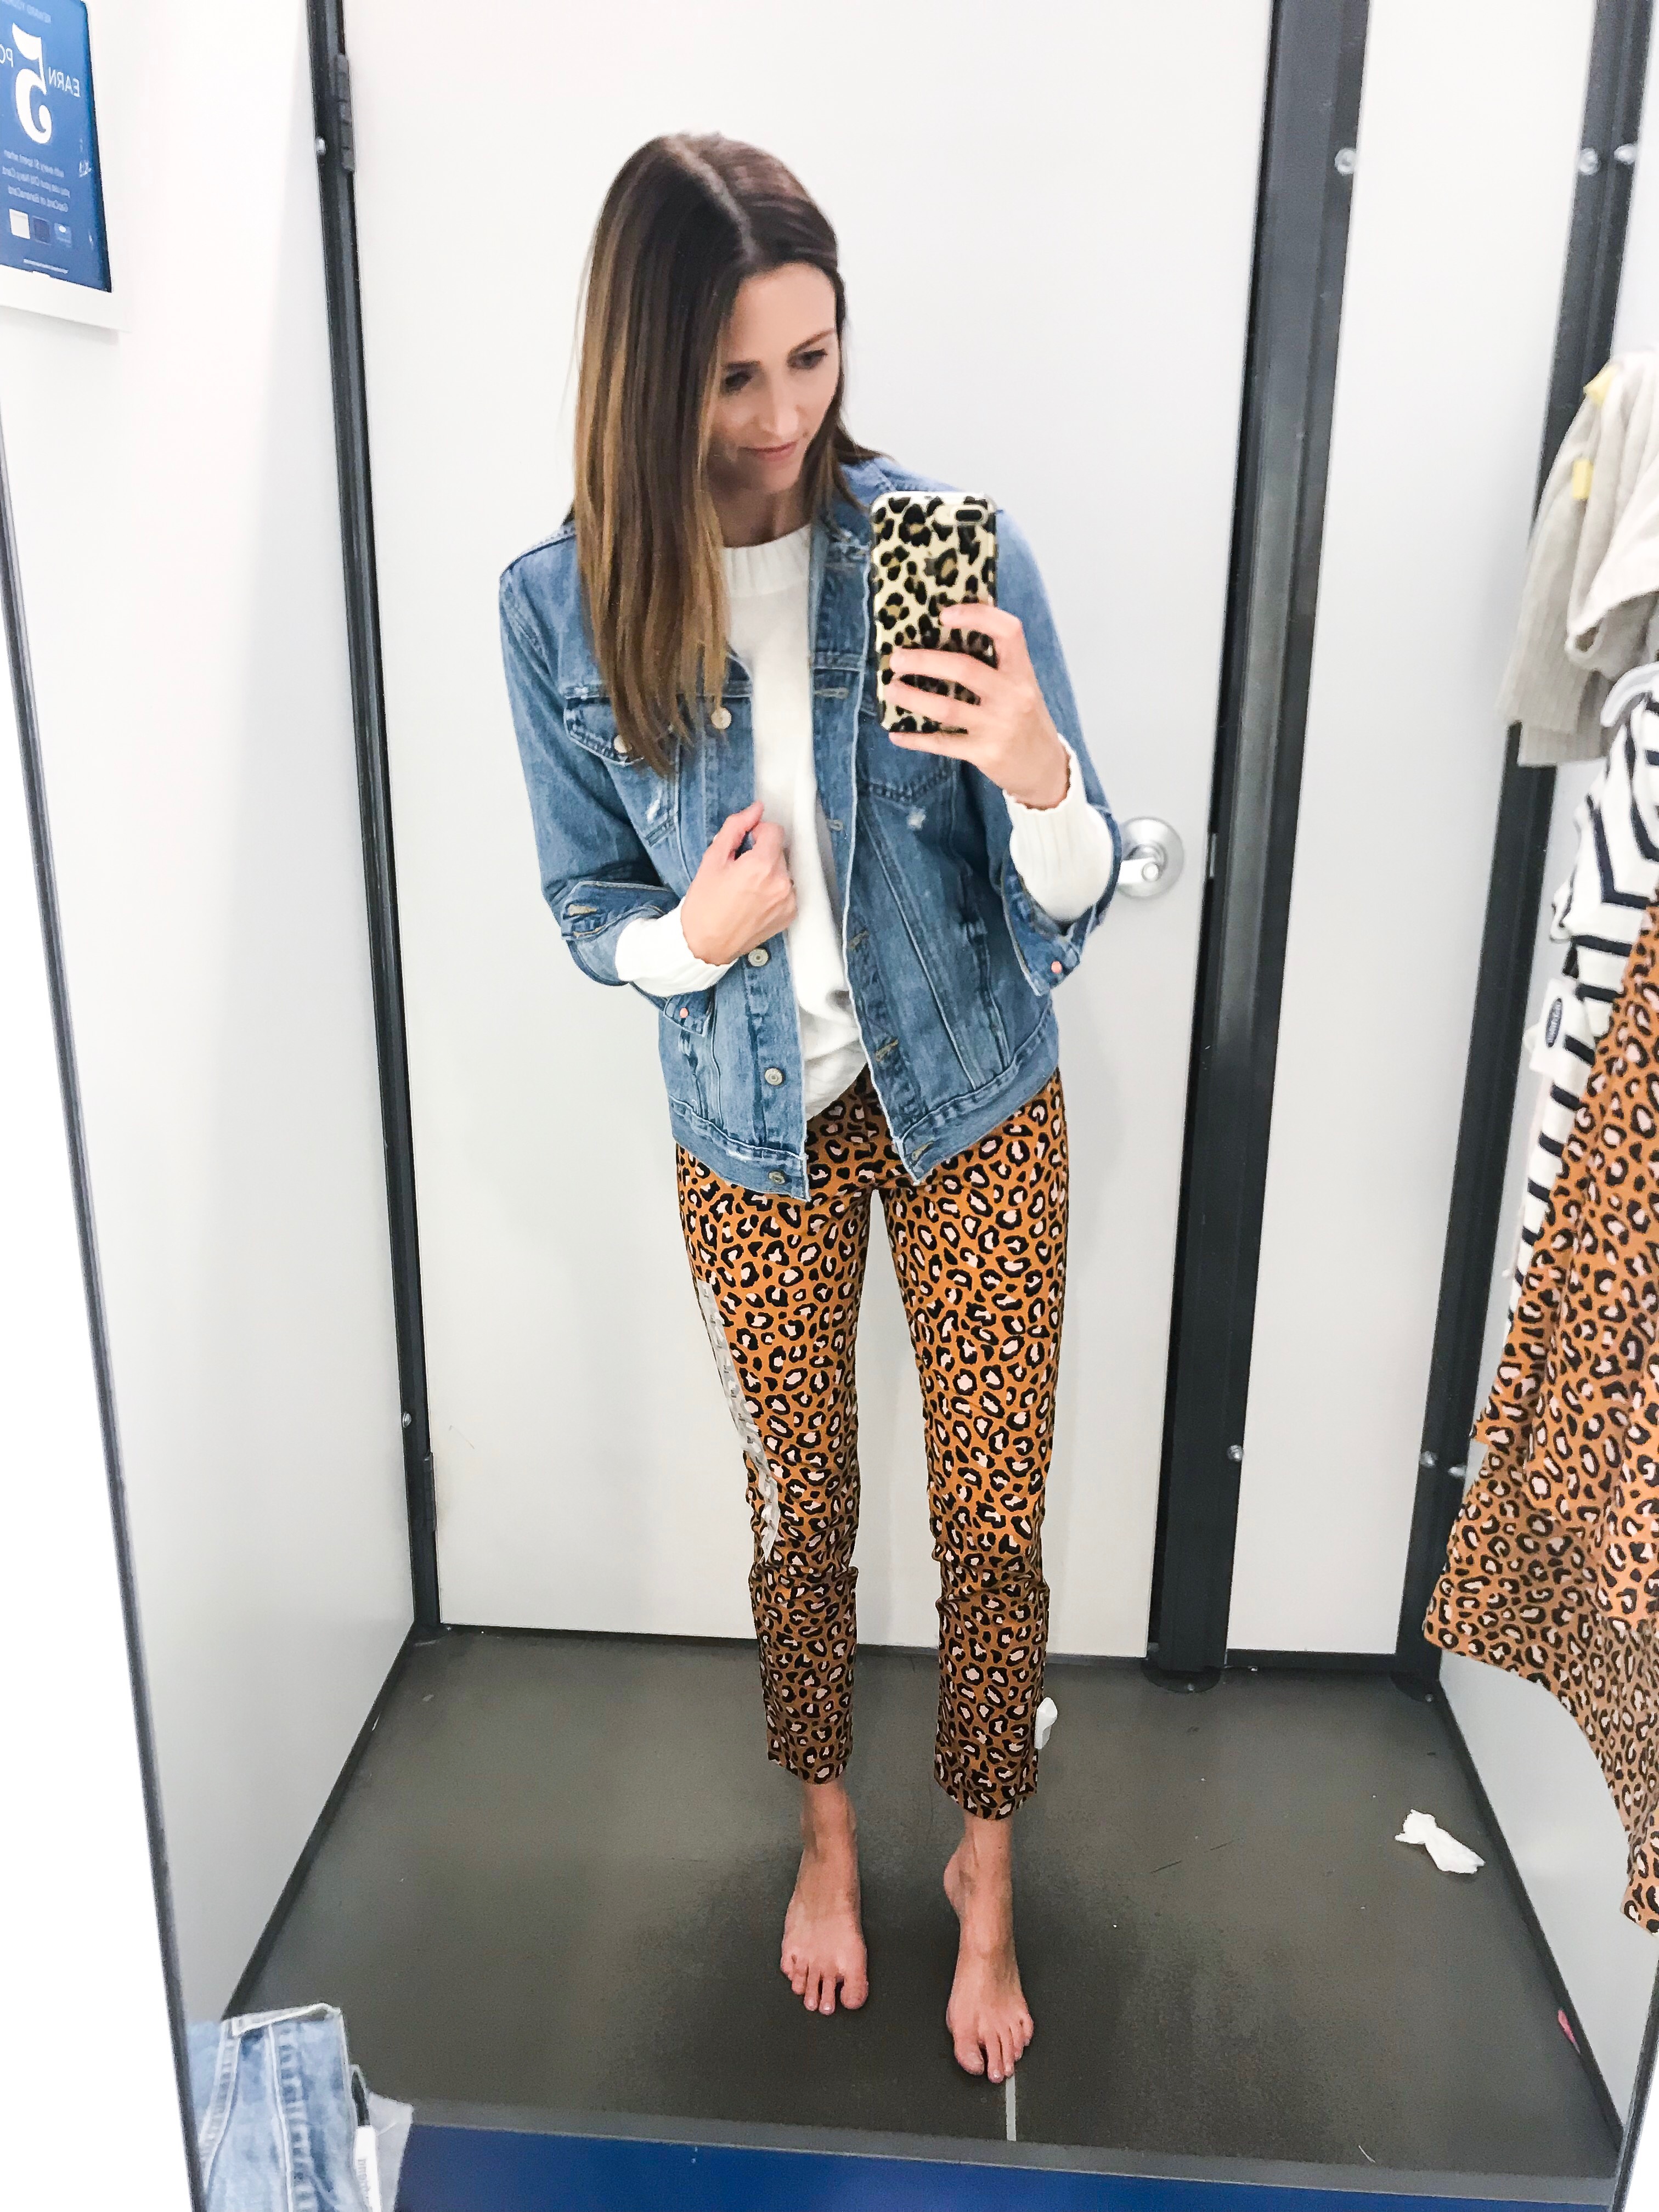 Old Navy Try-On Session - Midwest In Style